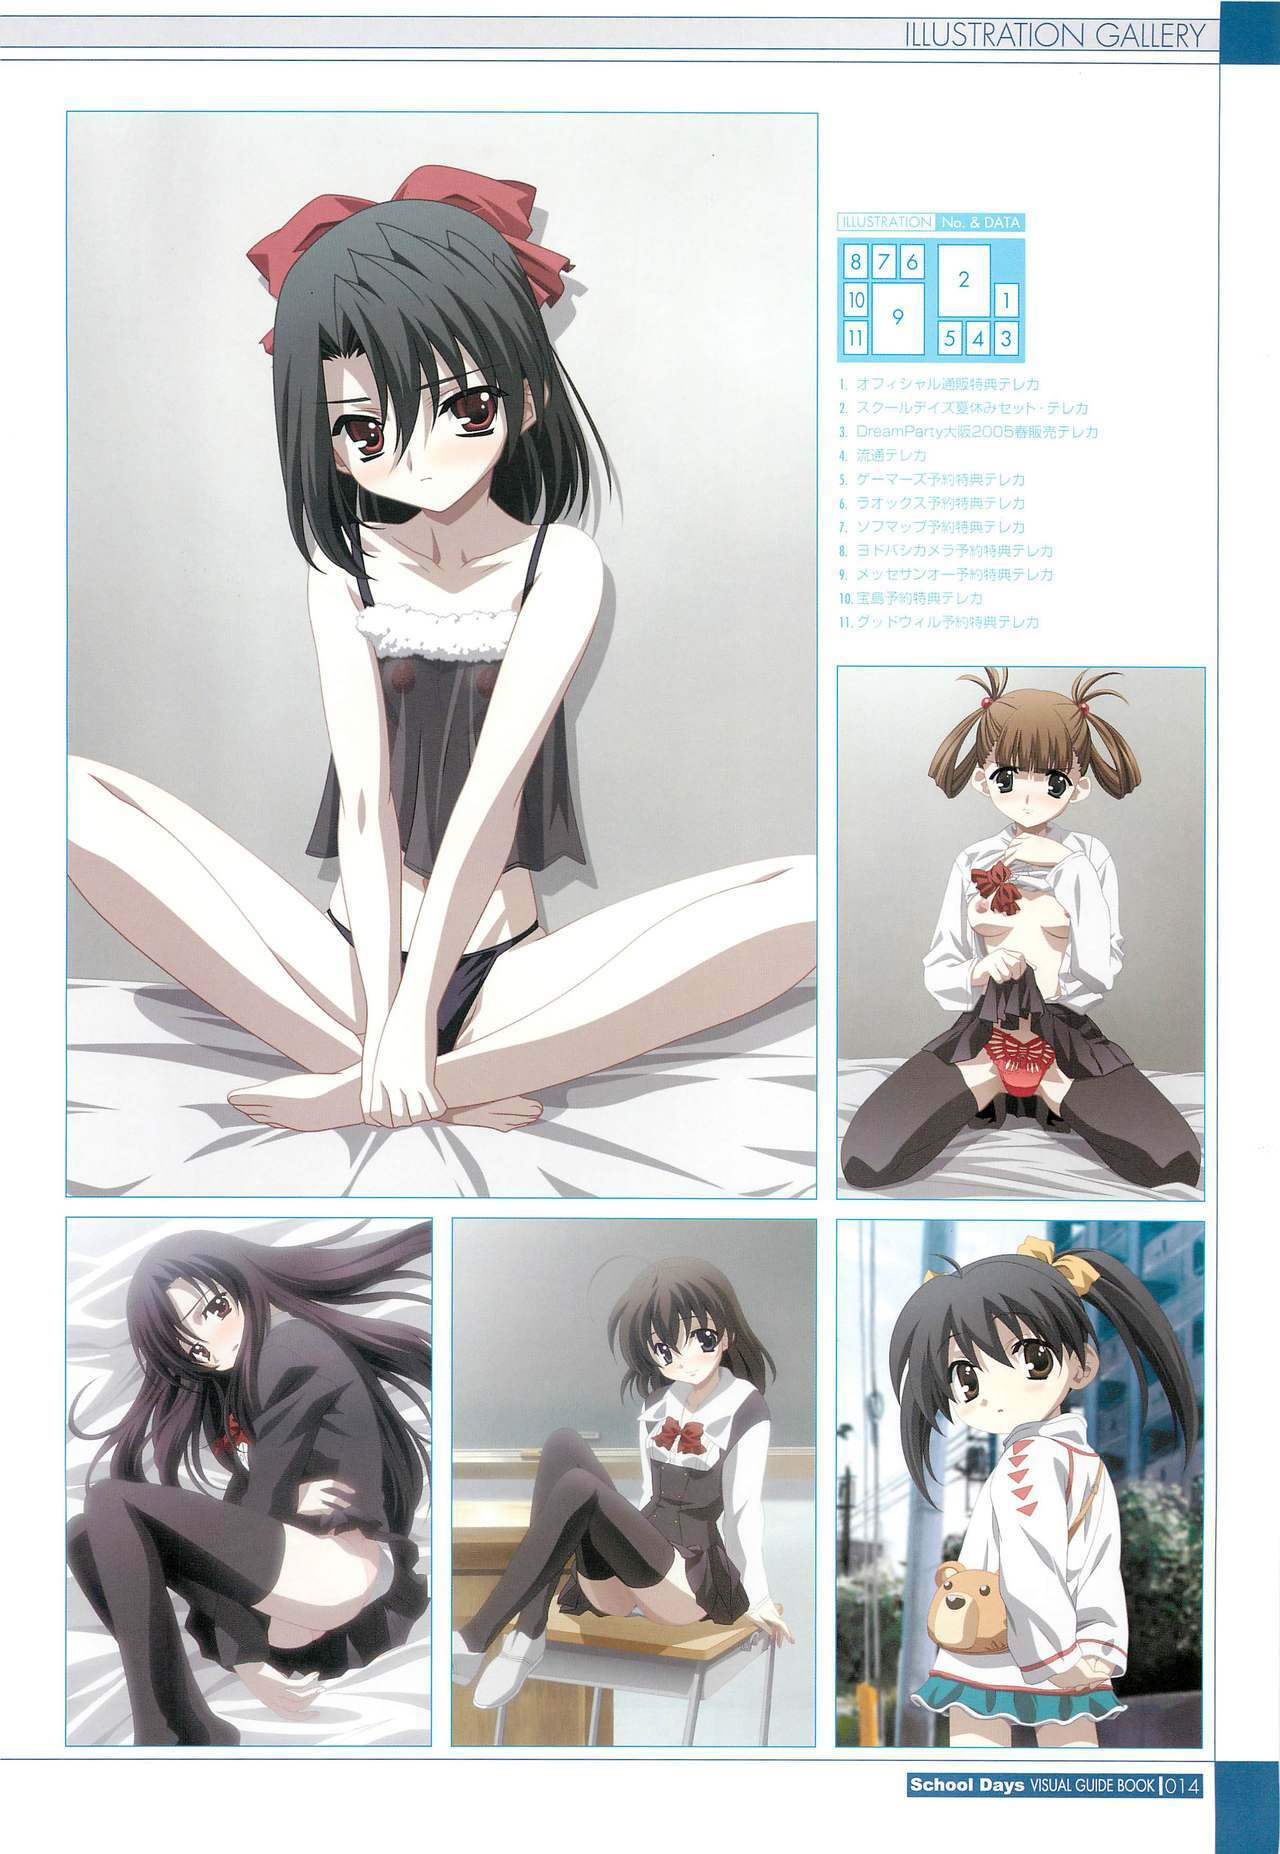 School Days Visual Guide Book page 16 full